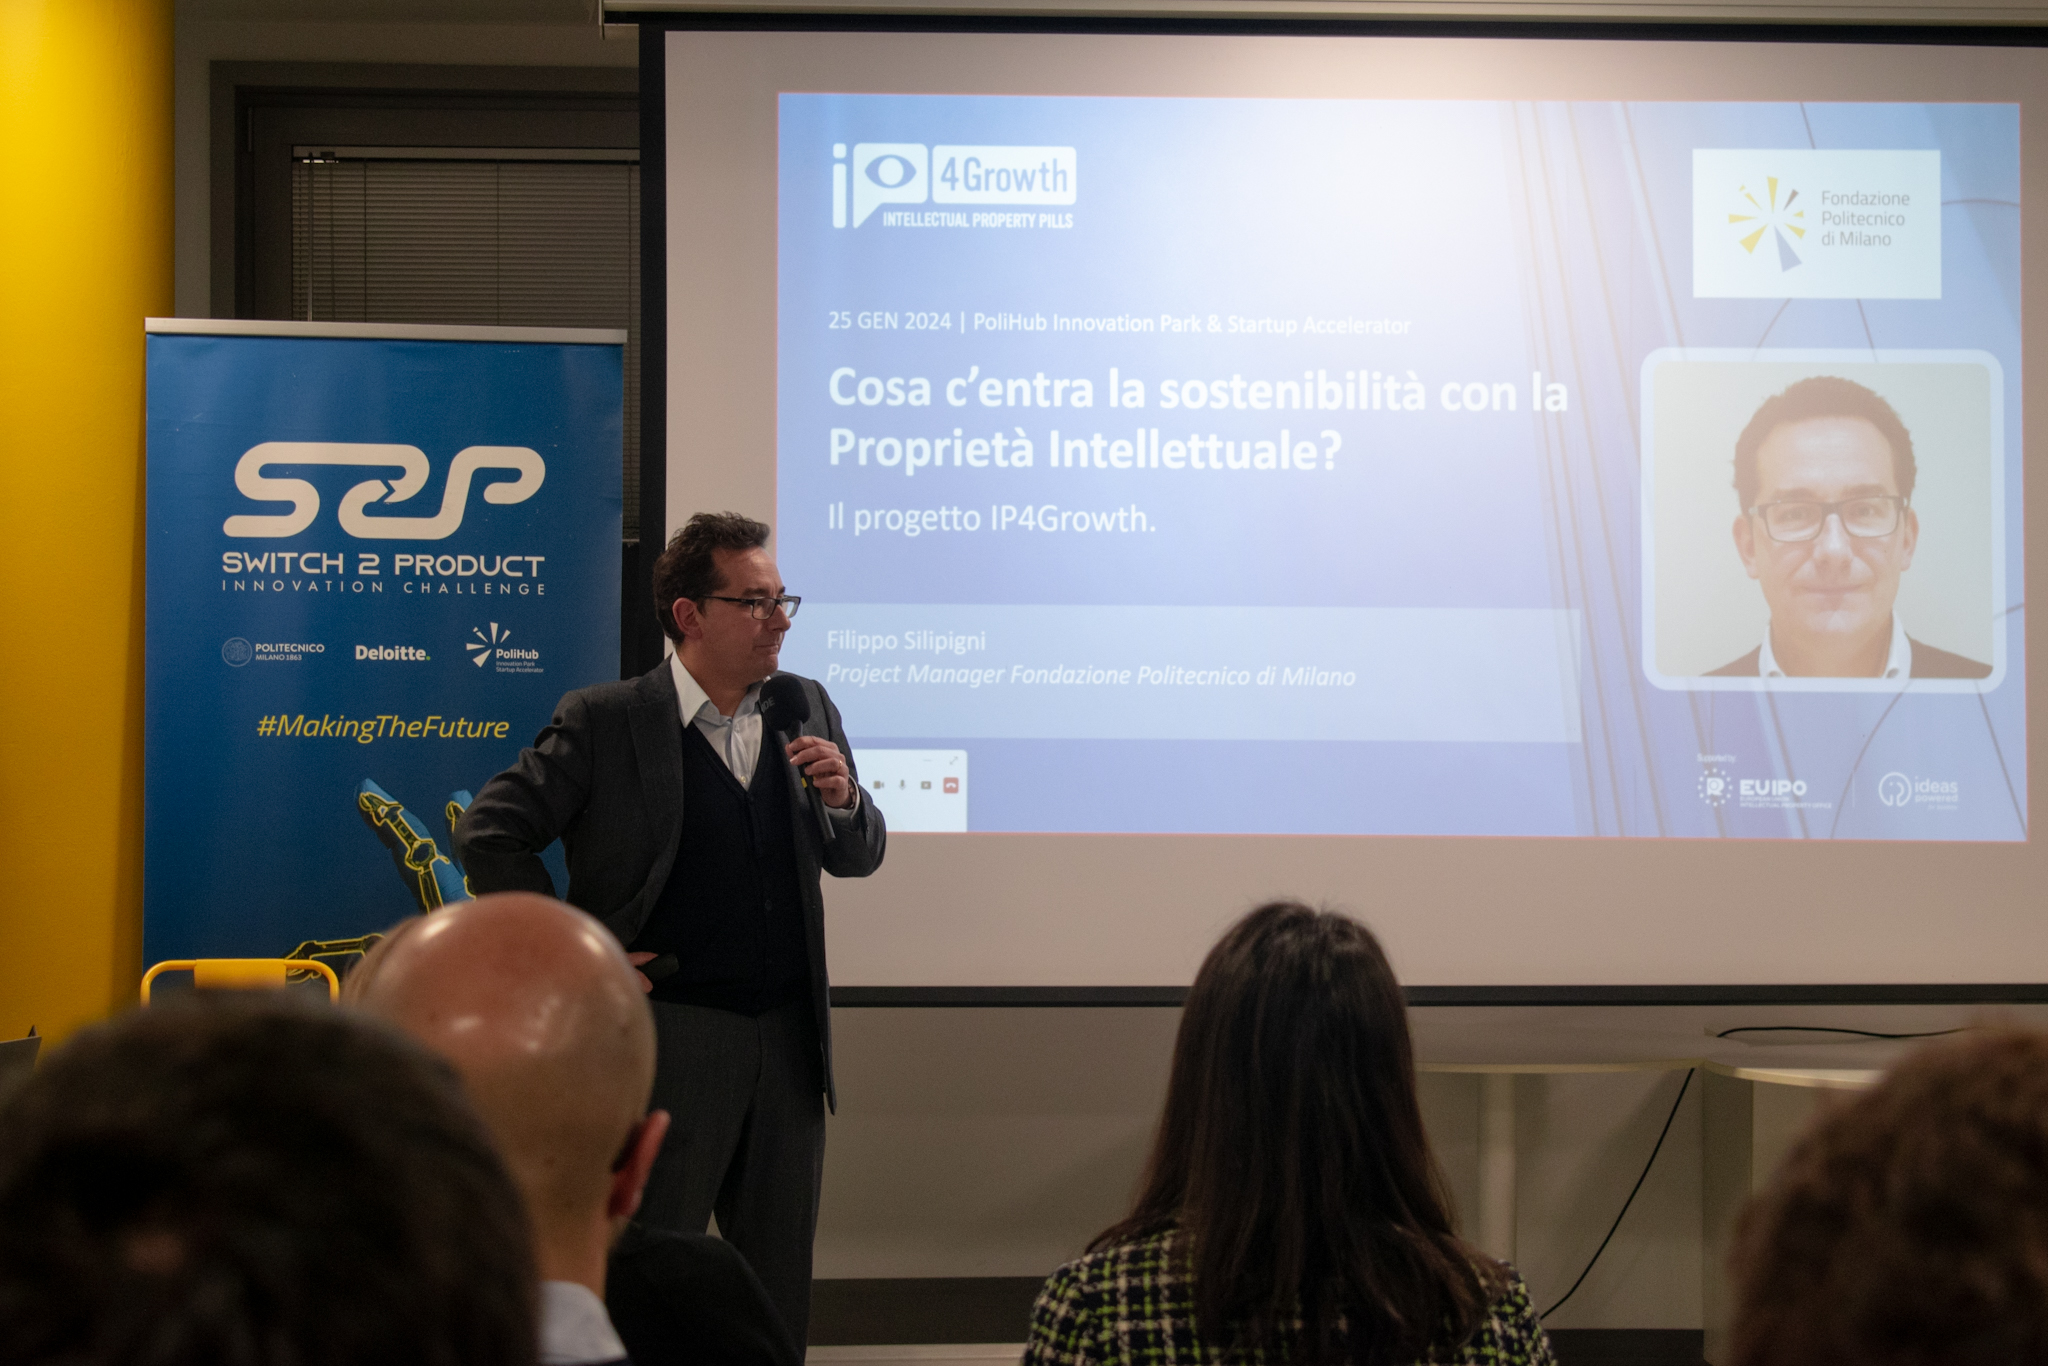 Intellectual property as an engine for competitiveness and sustainability